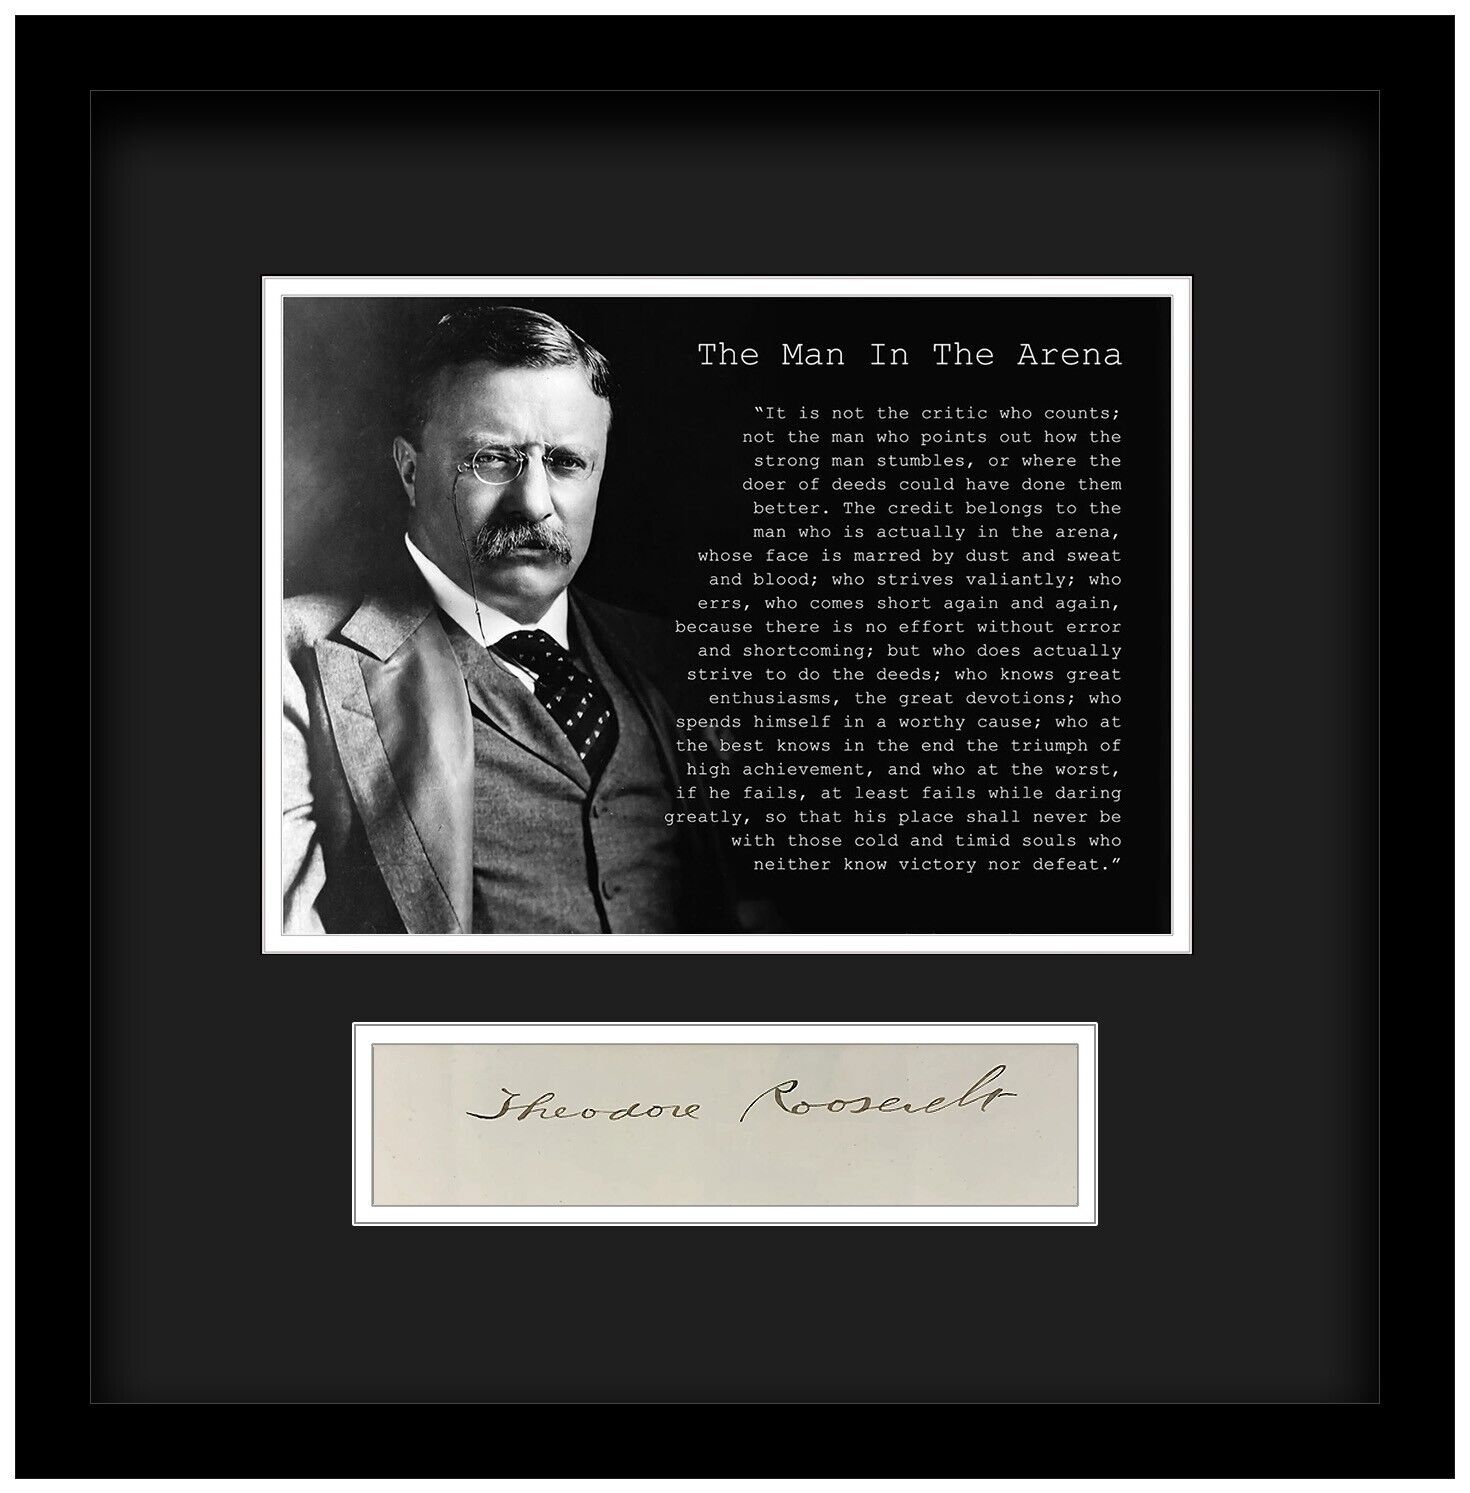 Theodore Teddy Roosevelt &quot;The Man in the Arena&quot; Autograph Framed Signature. JSA